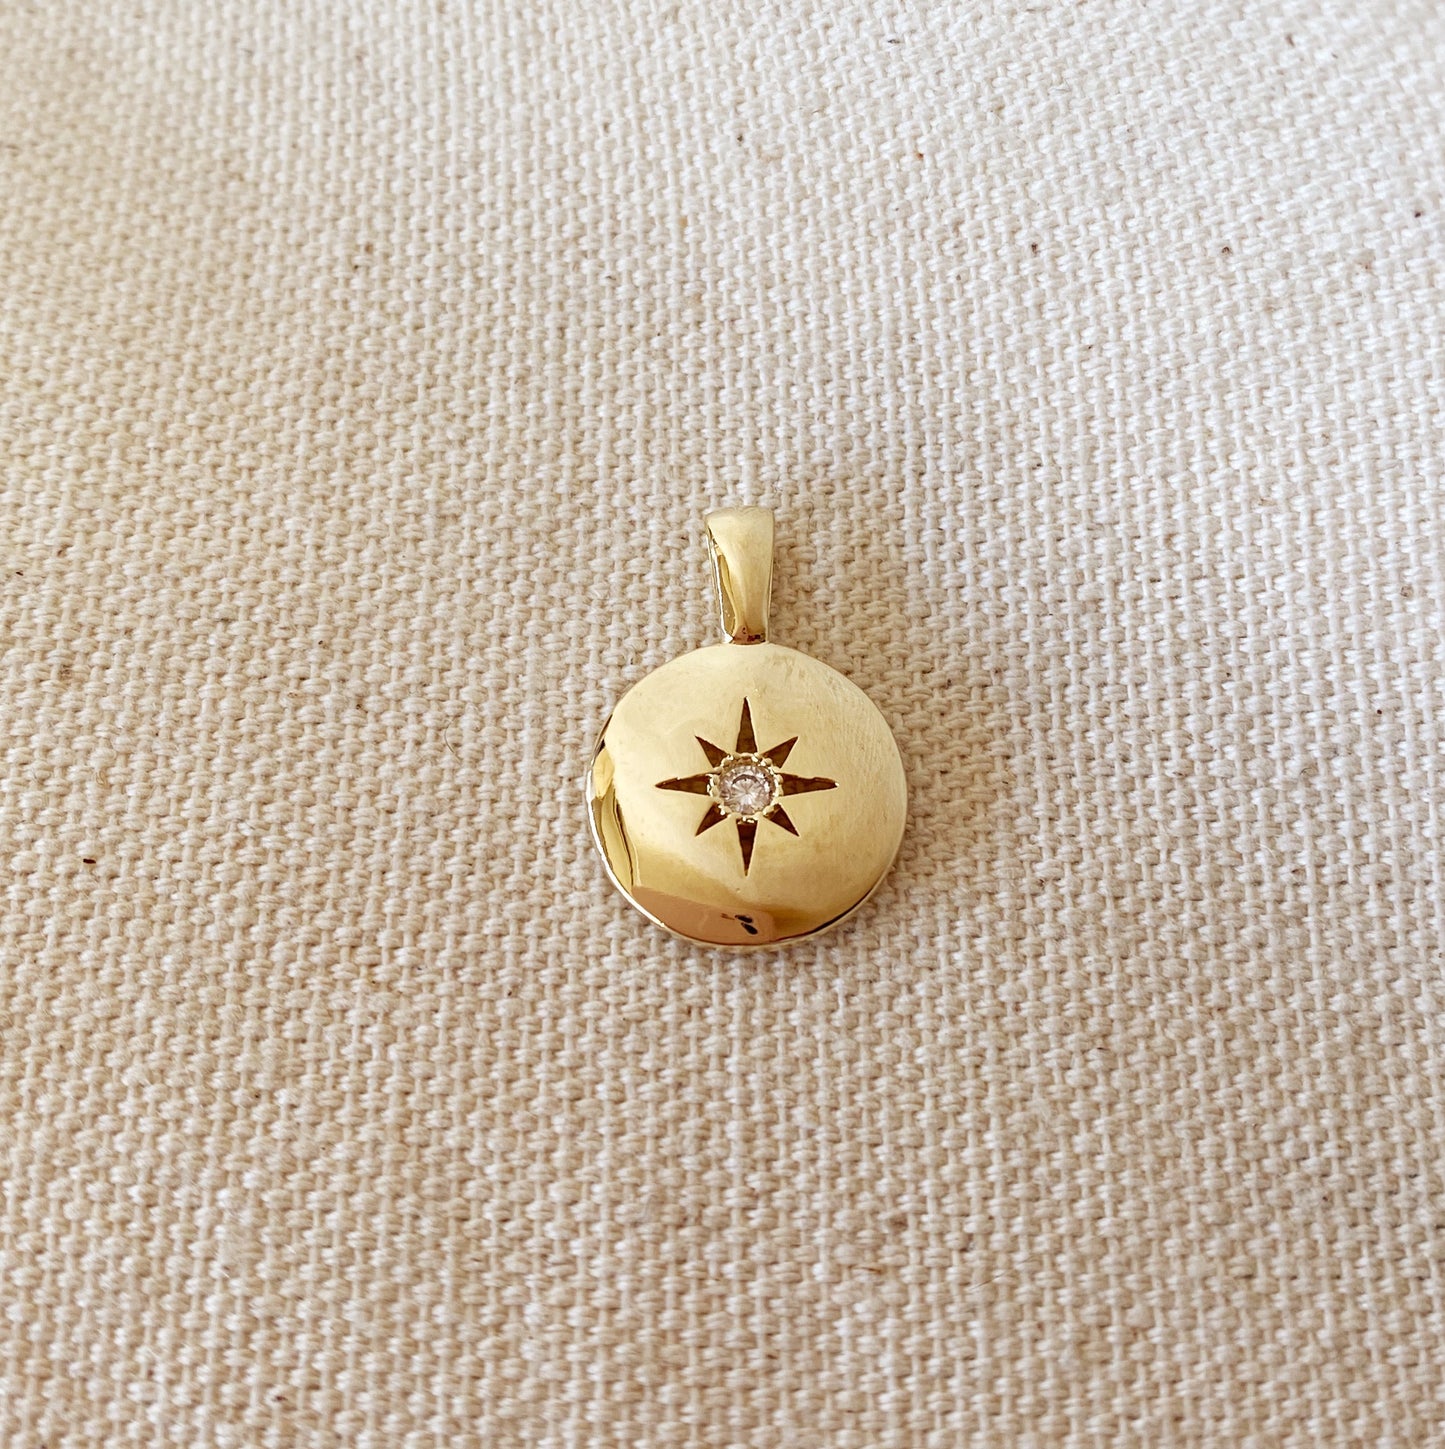 18k Gold Filled Starburst Plate Pendant With Cubic Zirconia Stone